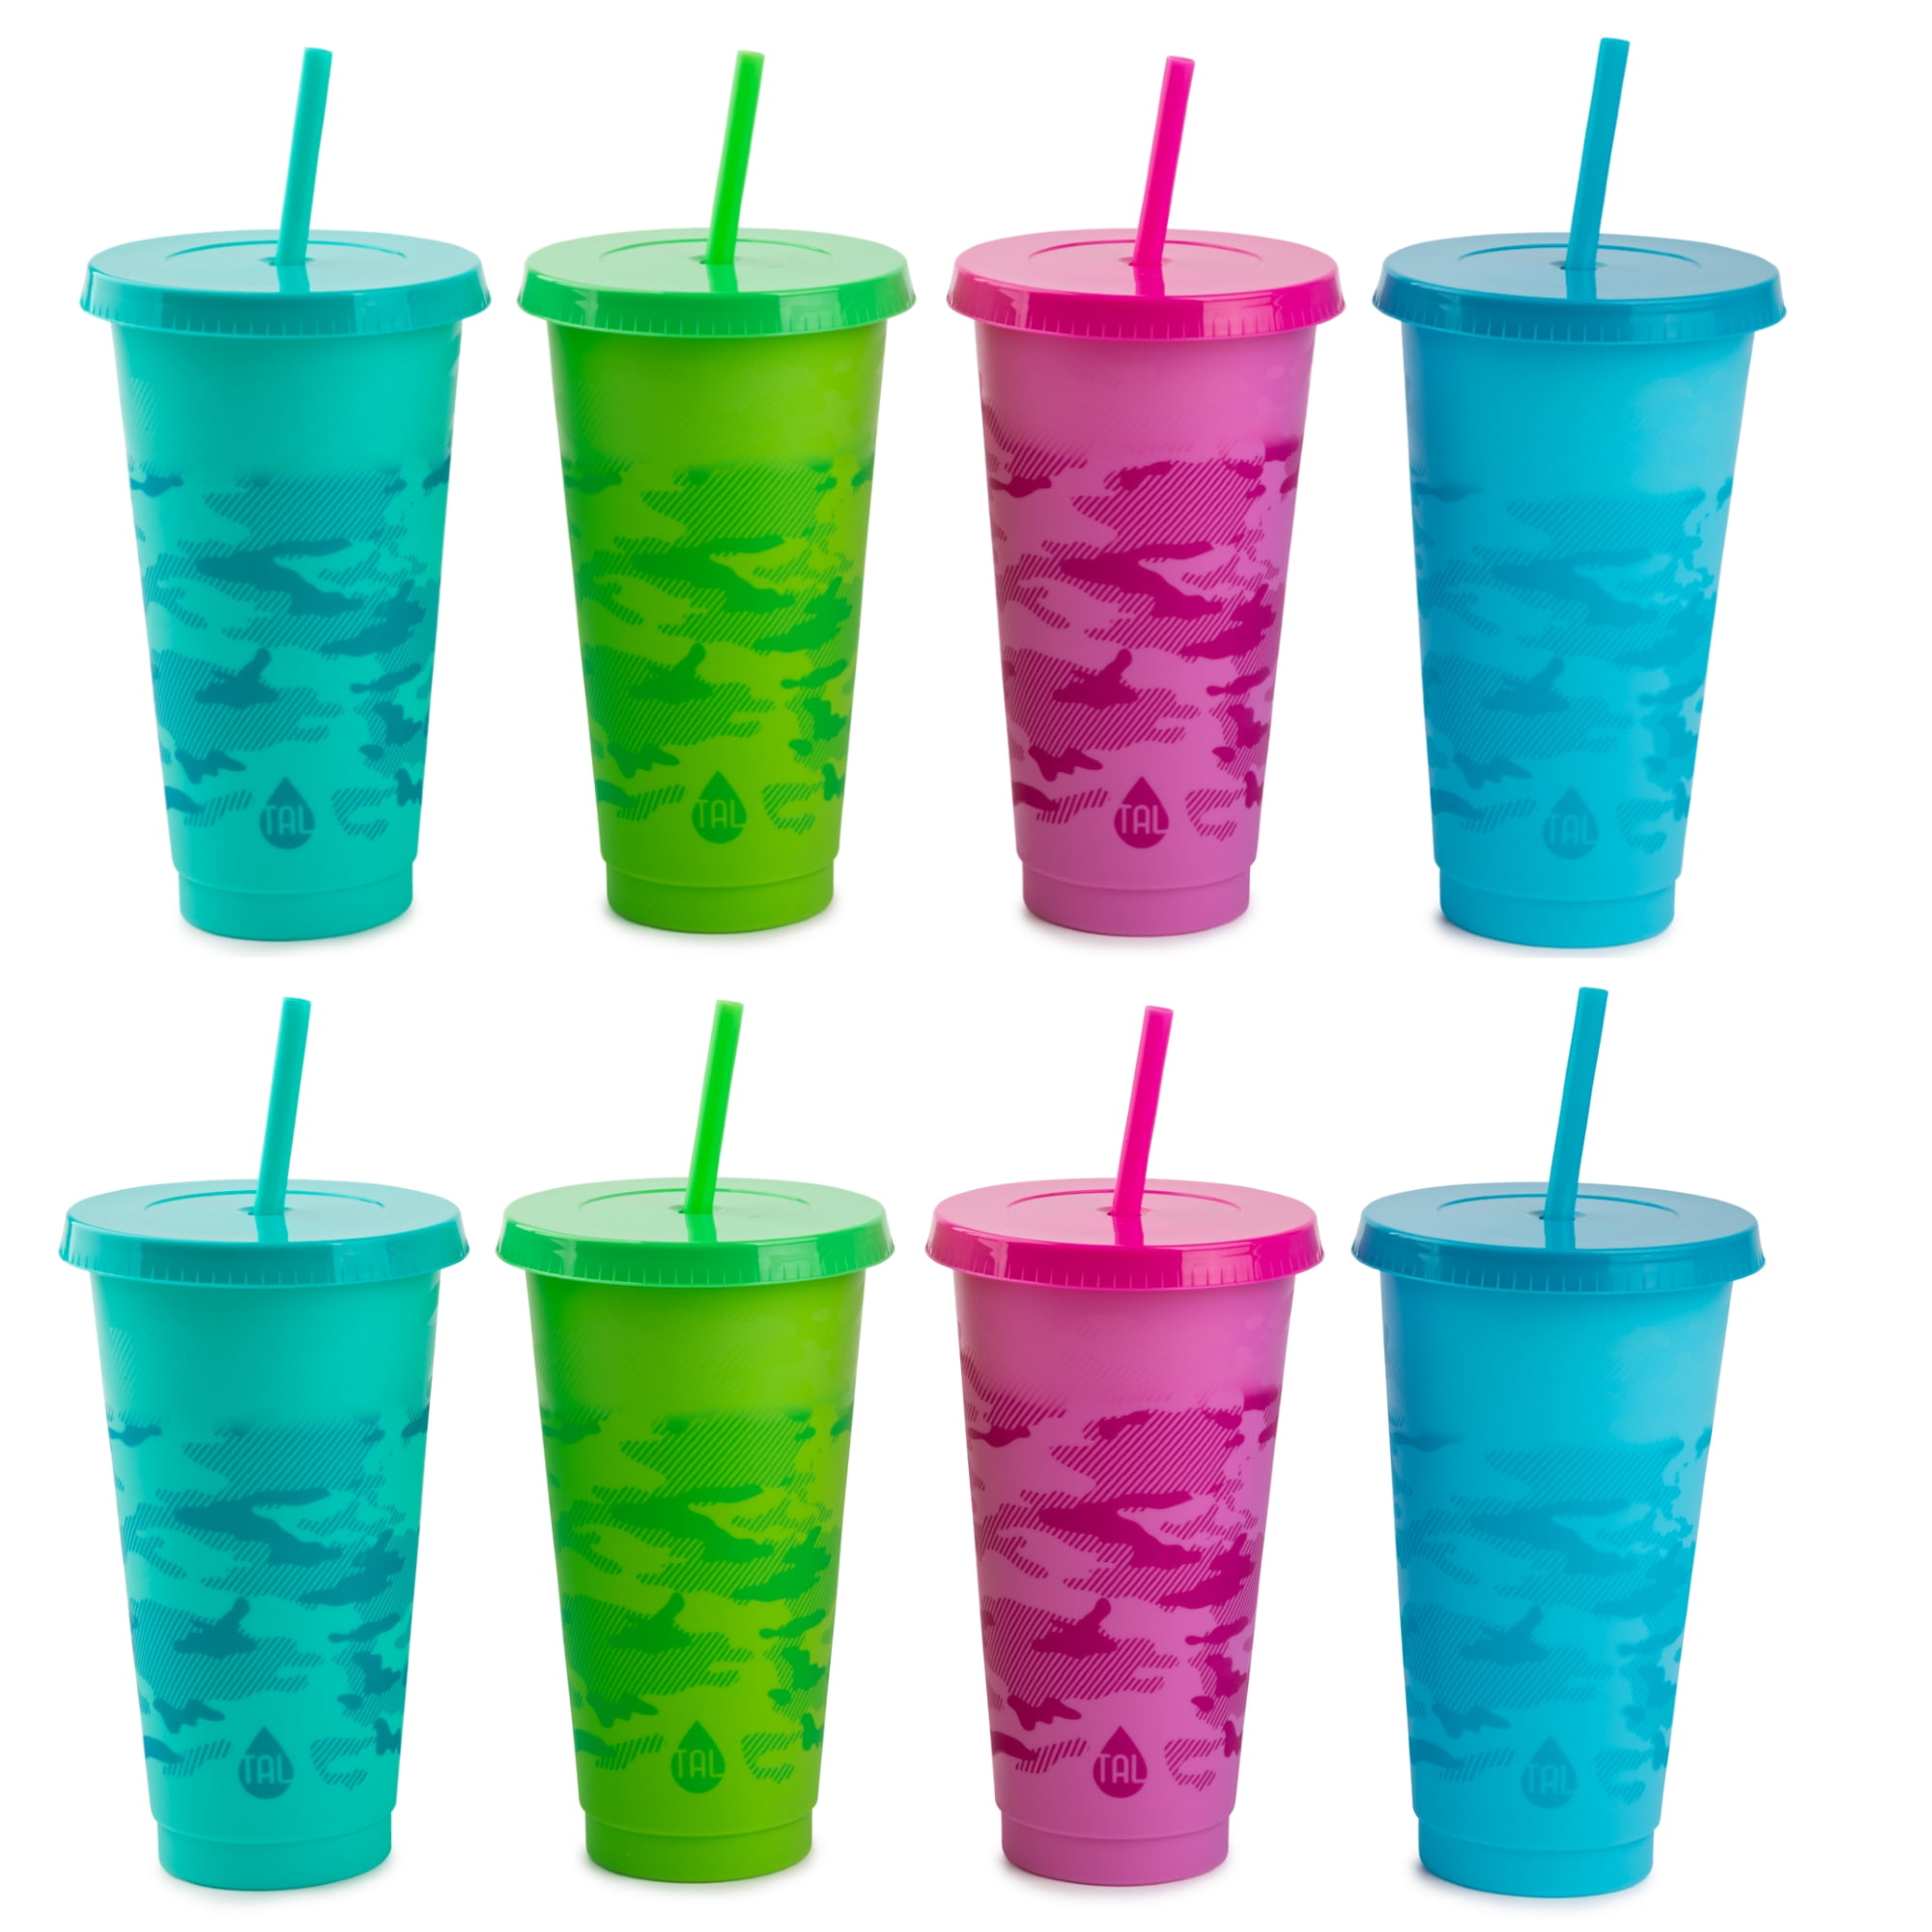 LEAN ON US TAL Color Changing Tumbler & Straw Set. 24 oz. 4 Pack : Buy  Online at Best Price in KSA - Souq is now : Home